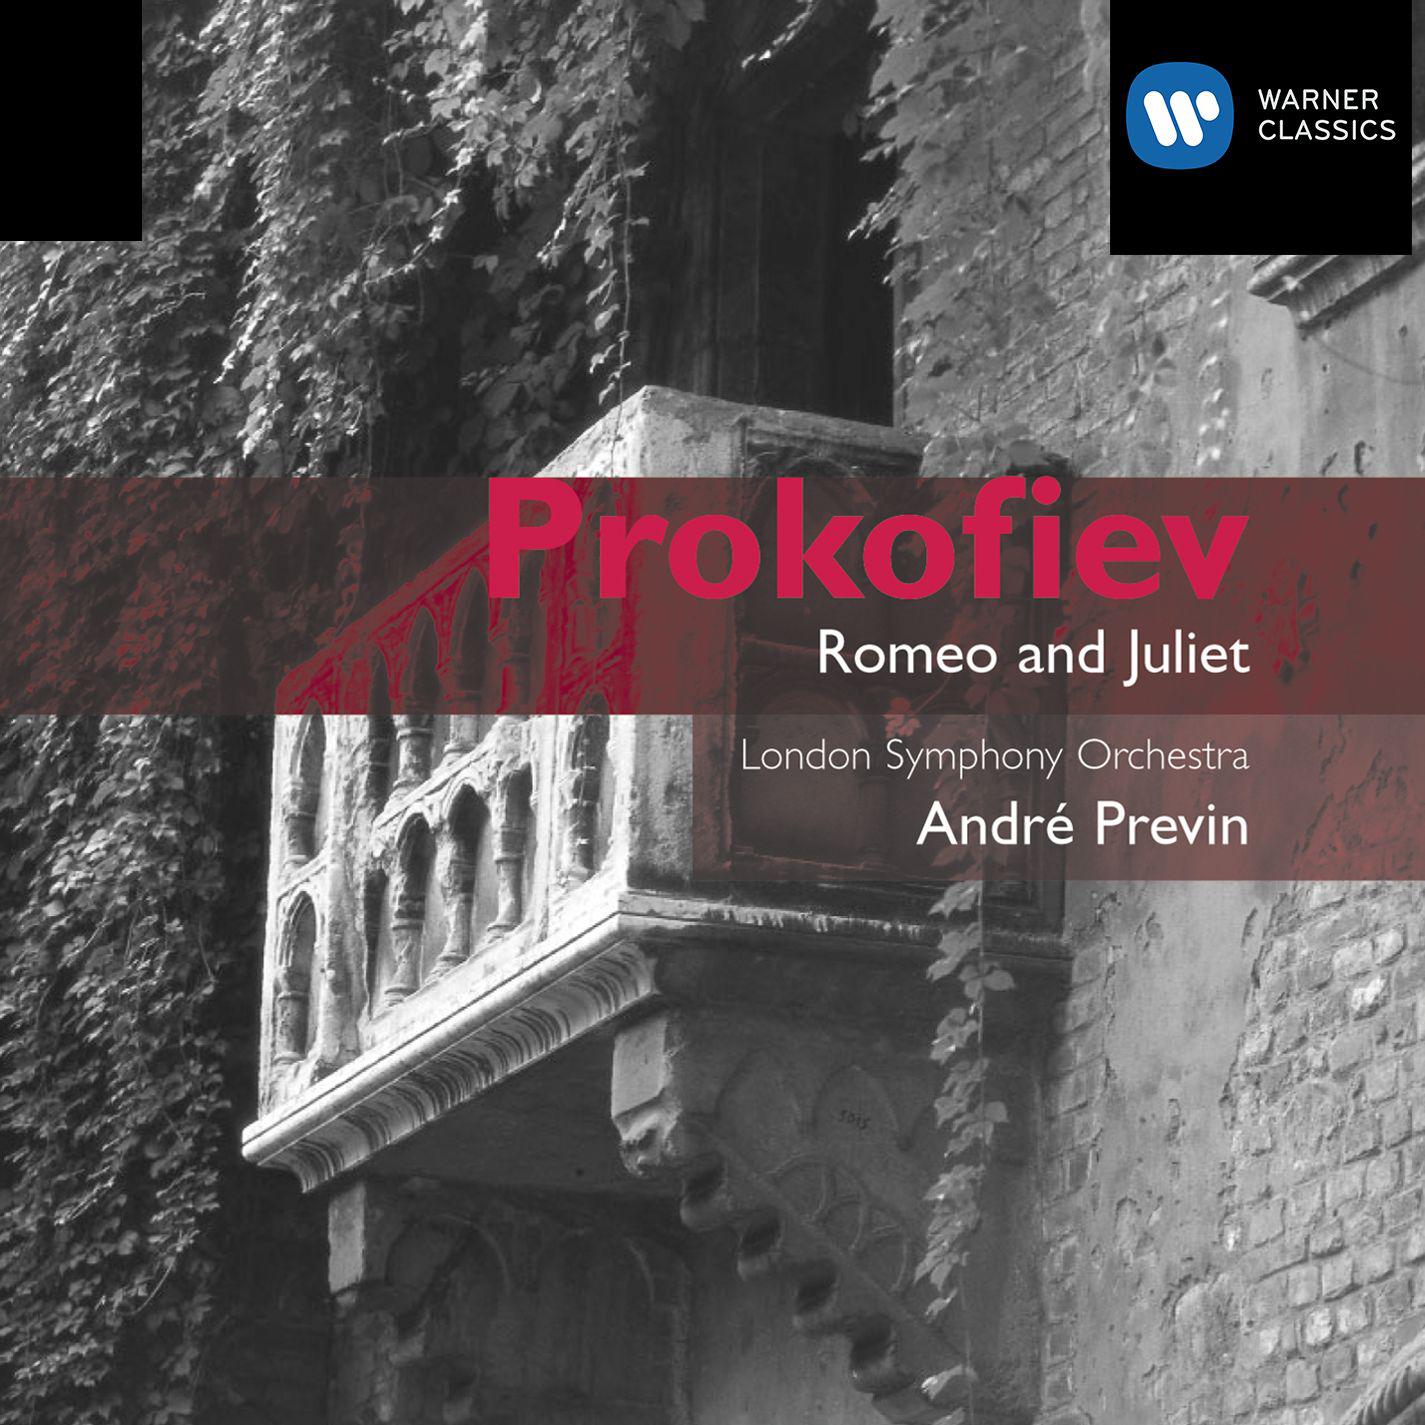 Romeo and Juliet (Complete Ballet), Op. 64, Act 3:No. 45, Interlude